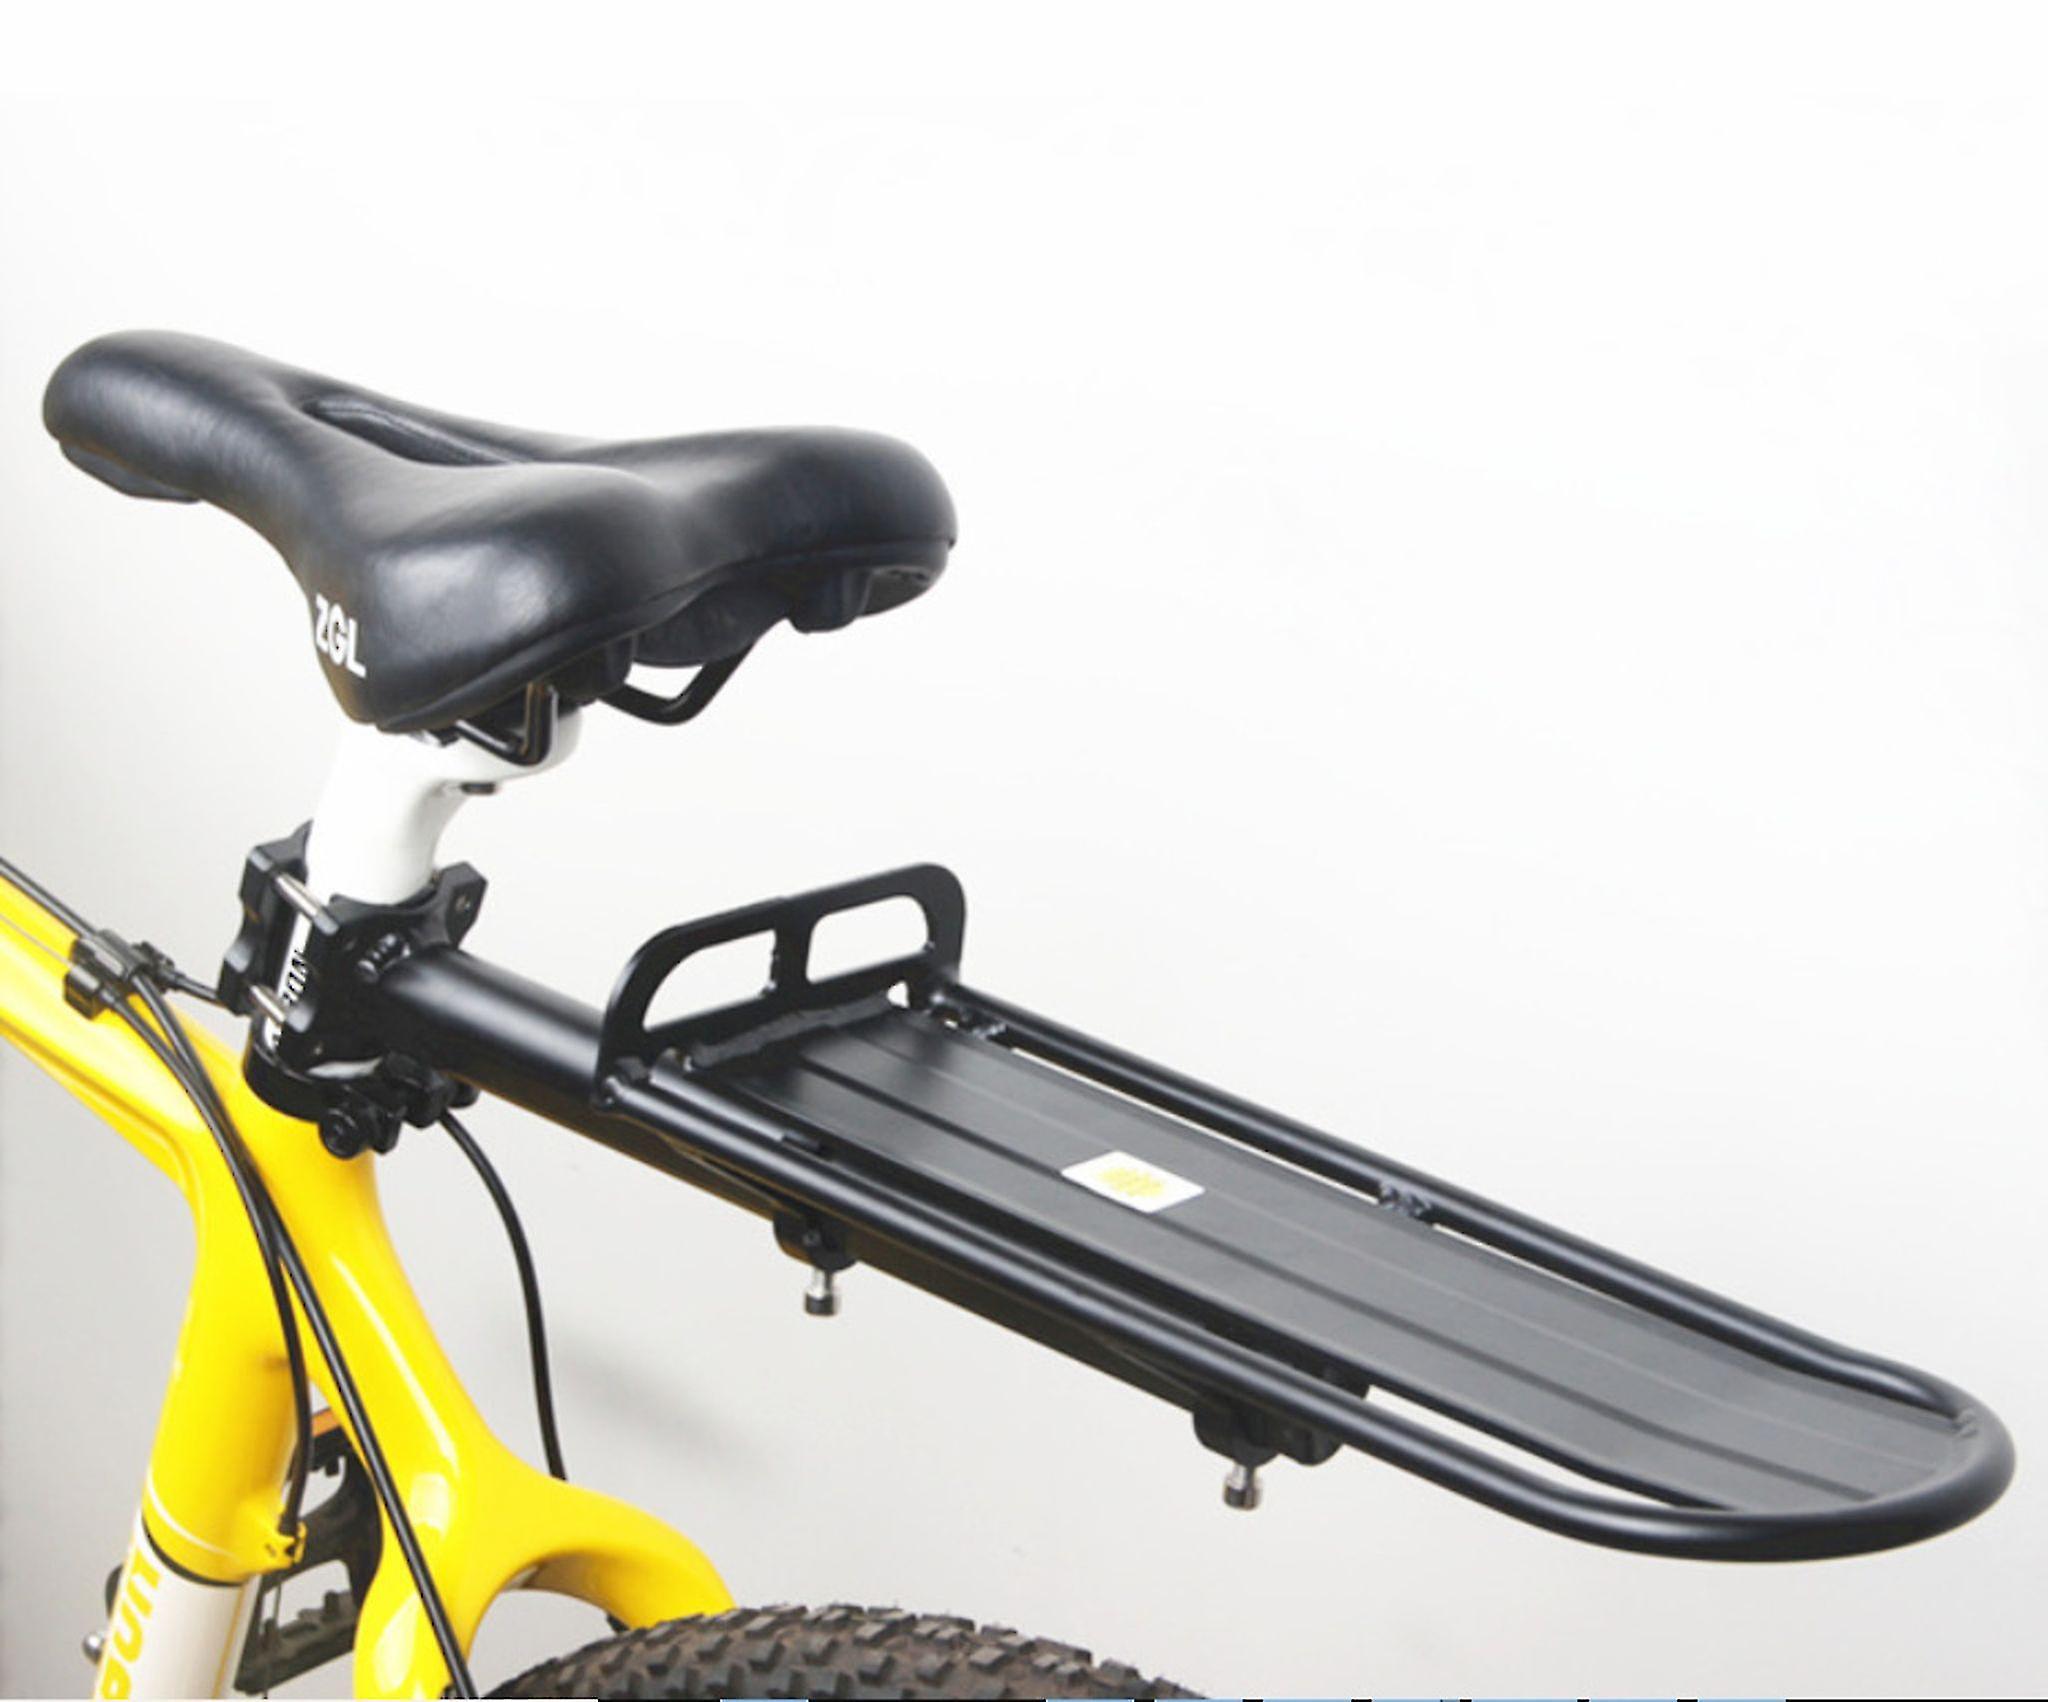 Bicycle Aluminum Luggage Rack Is Suitable For Mountain Bikes，the Seatpost Of Mountain Bikes Can Be Adjusted.